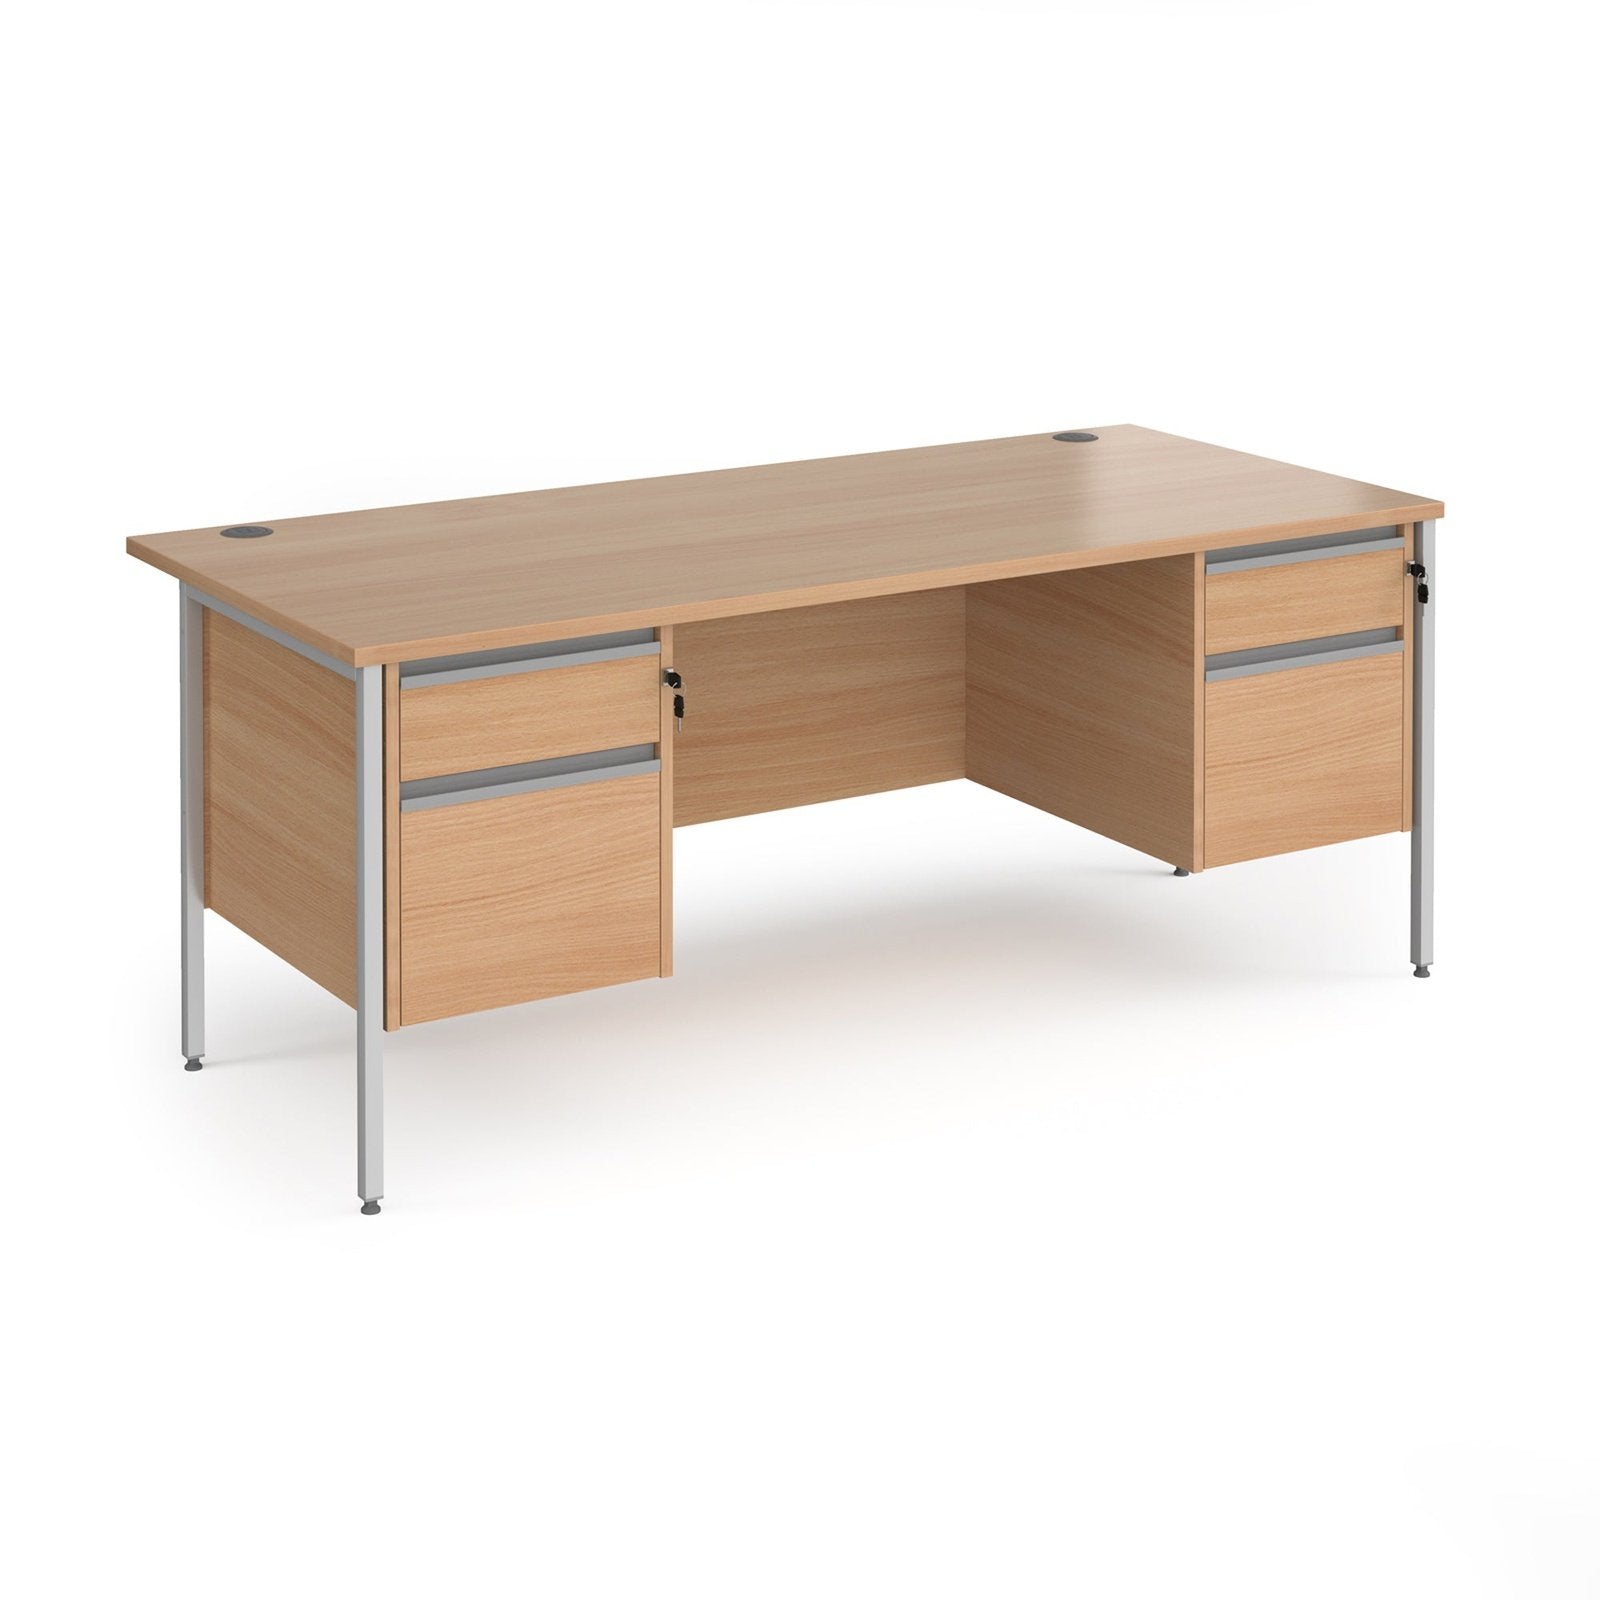 Contract 25 straight desk with 2 drawer pedestals and H-Frame leg - Office Products Online